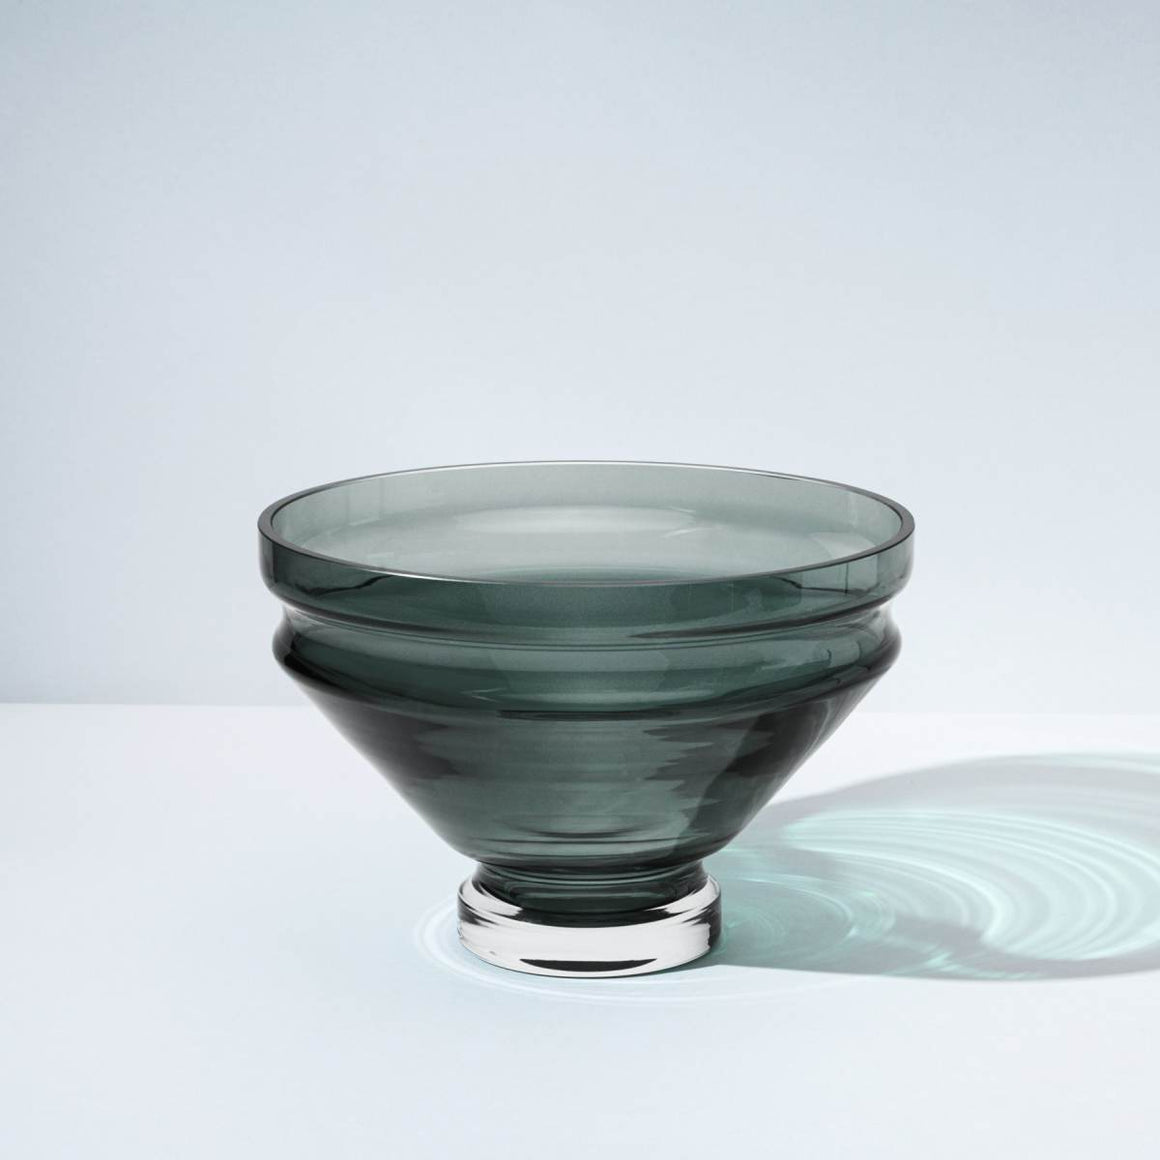 A smoky grey glass bowl with grooves at the top, which creates a rippling water effect in the bowl’s shadow